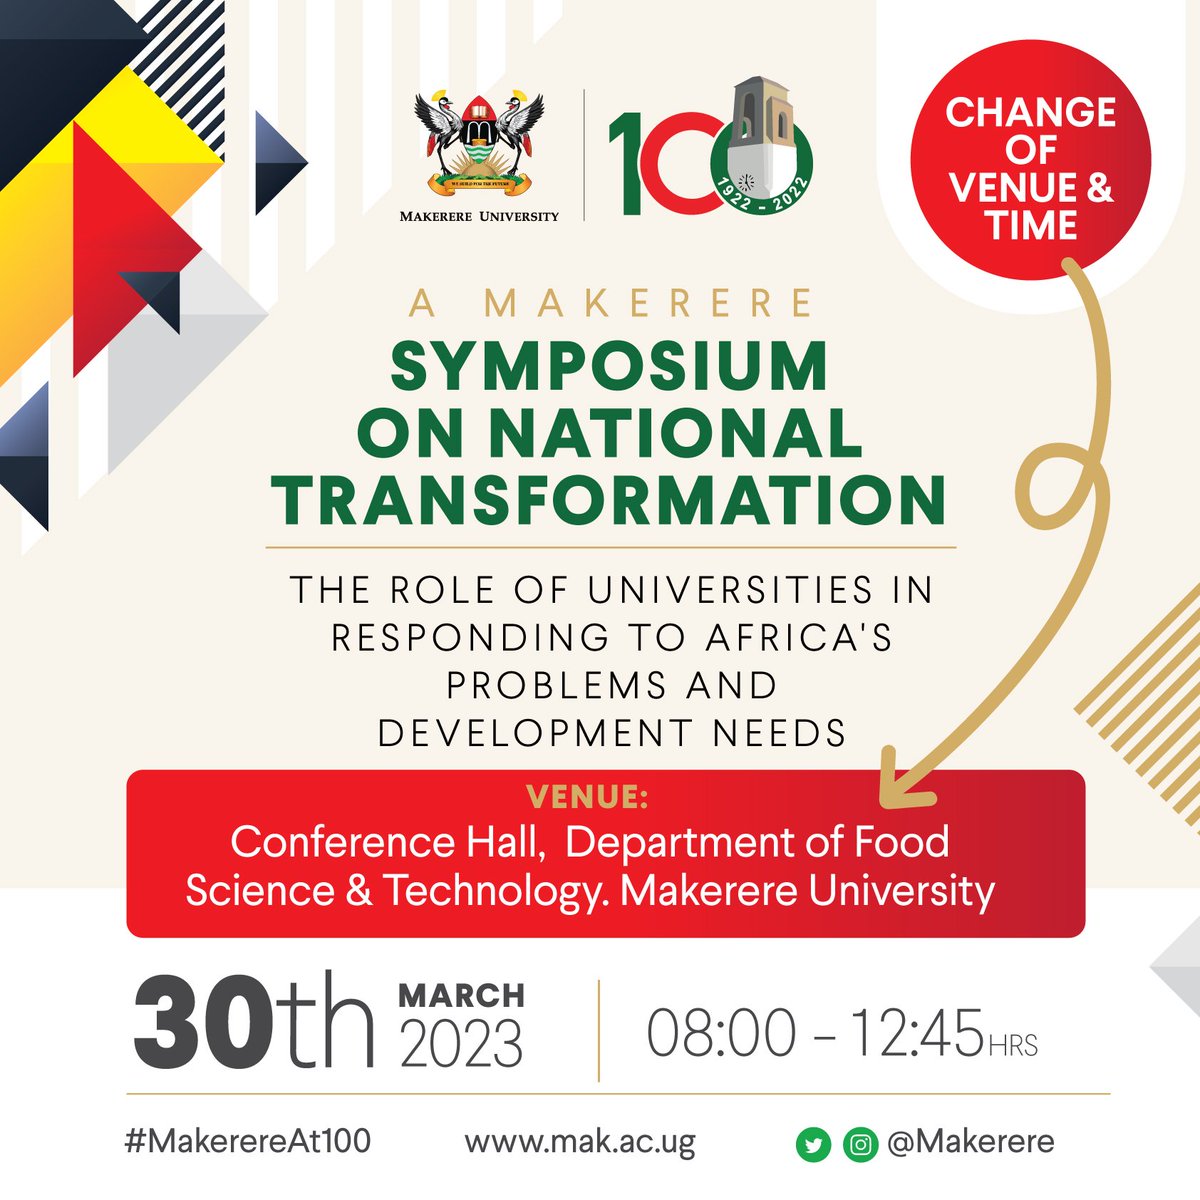 📌There has been a change of venue and time for the symposium, please kindly take note. Thurs/30th/Mar/2023 still remains as the date 🤝🏽 #MakerereAt100